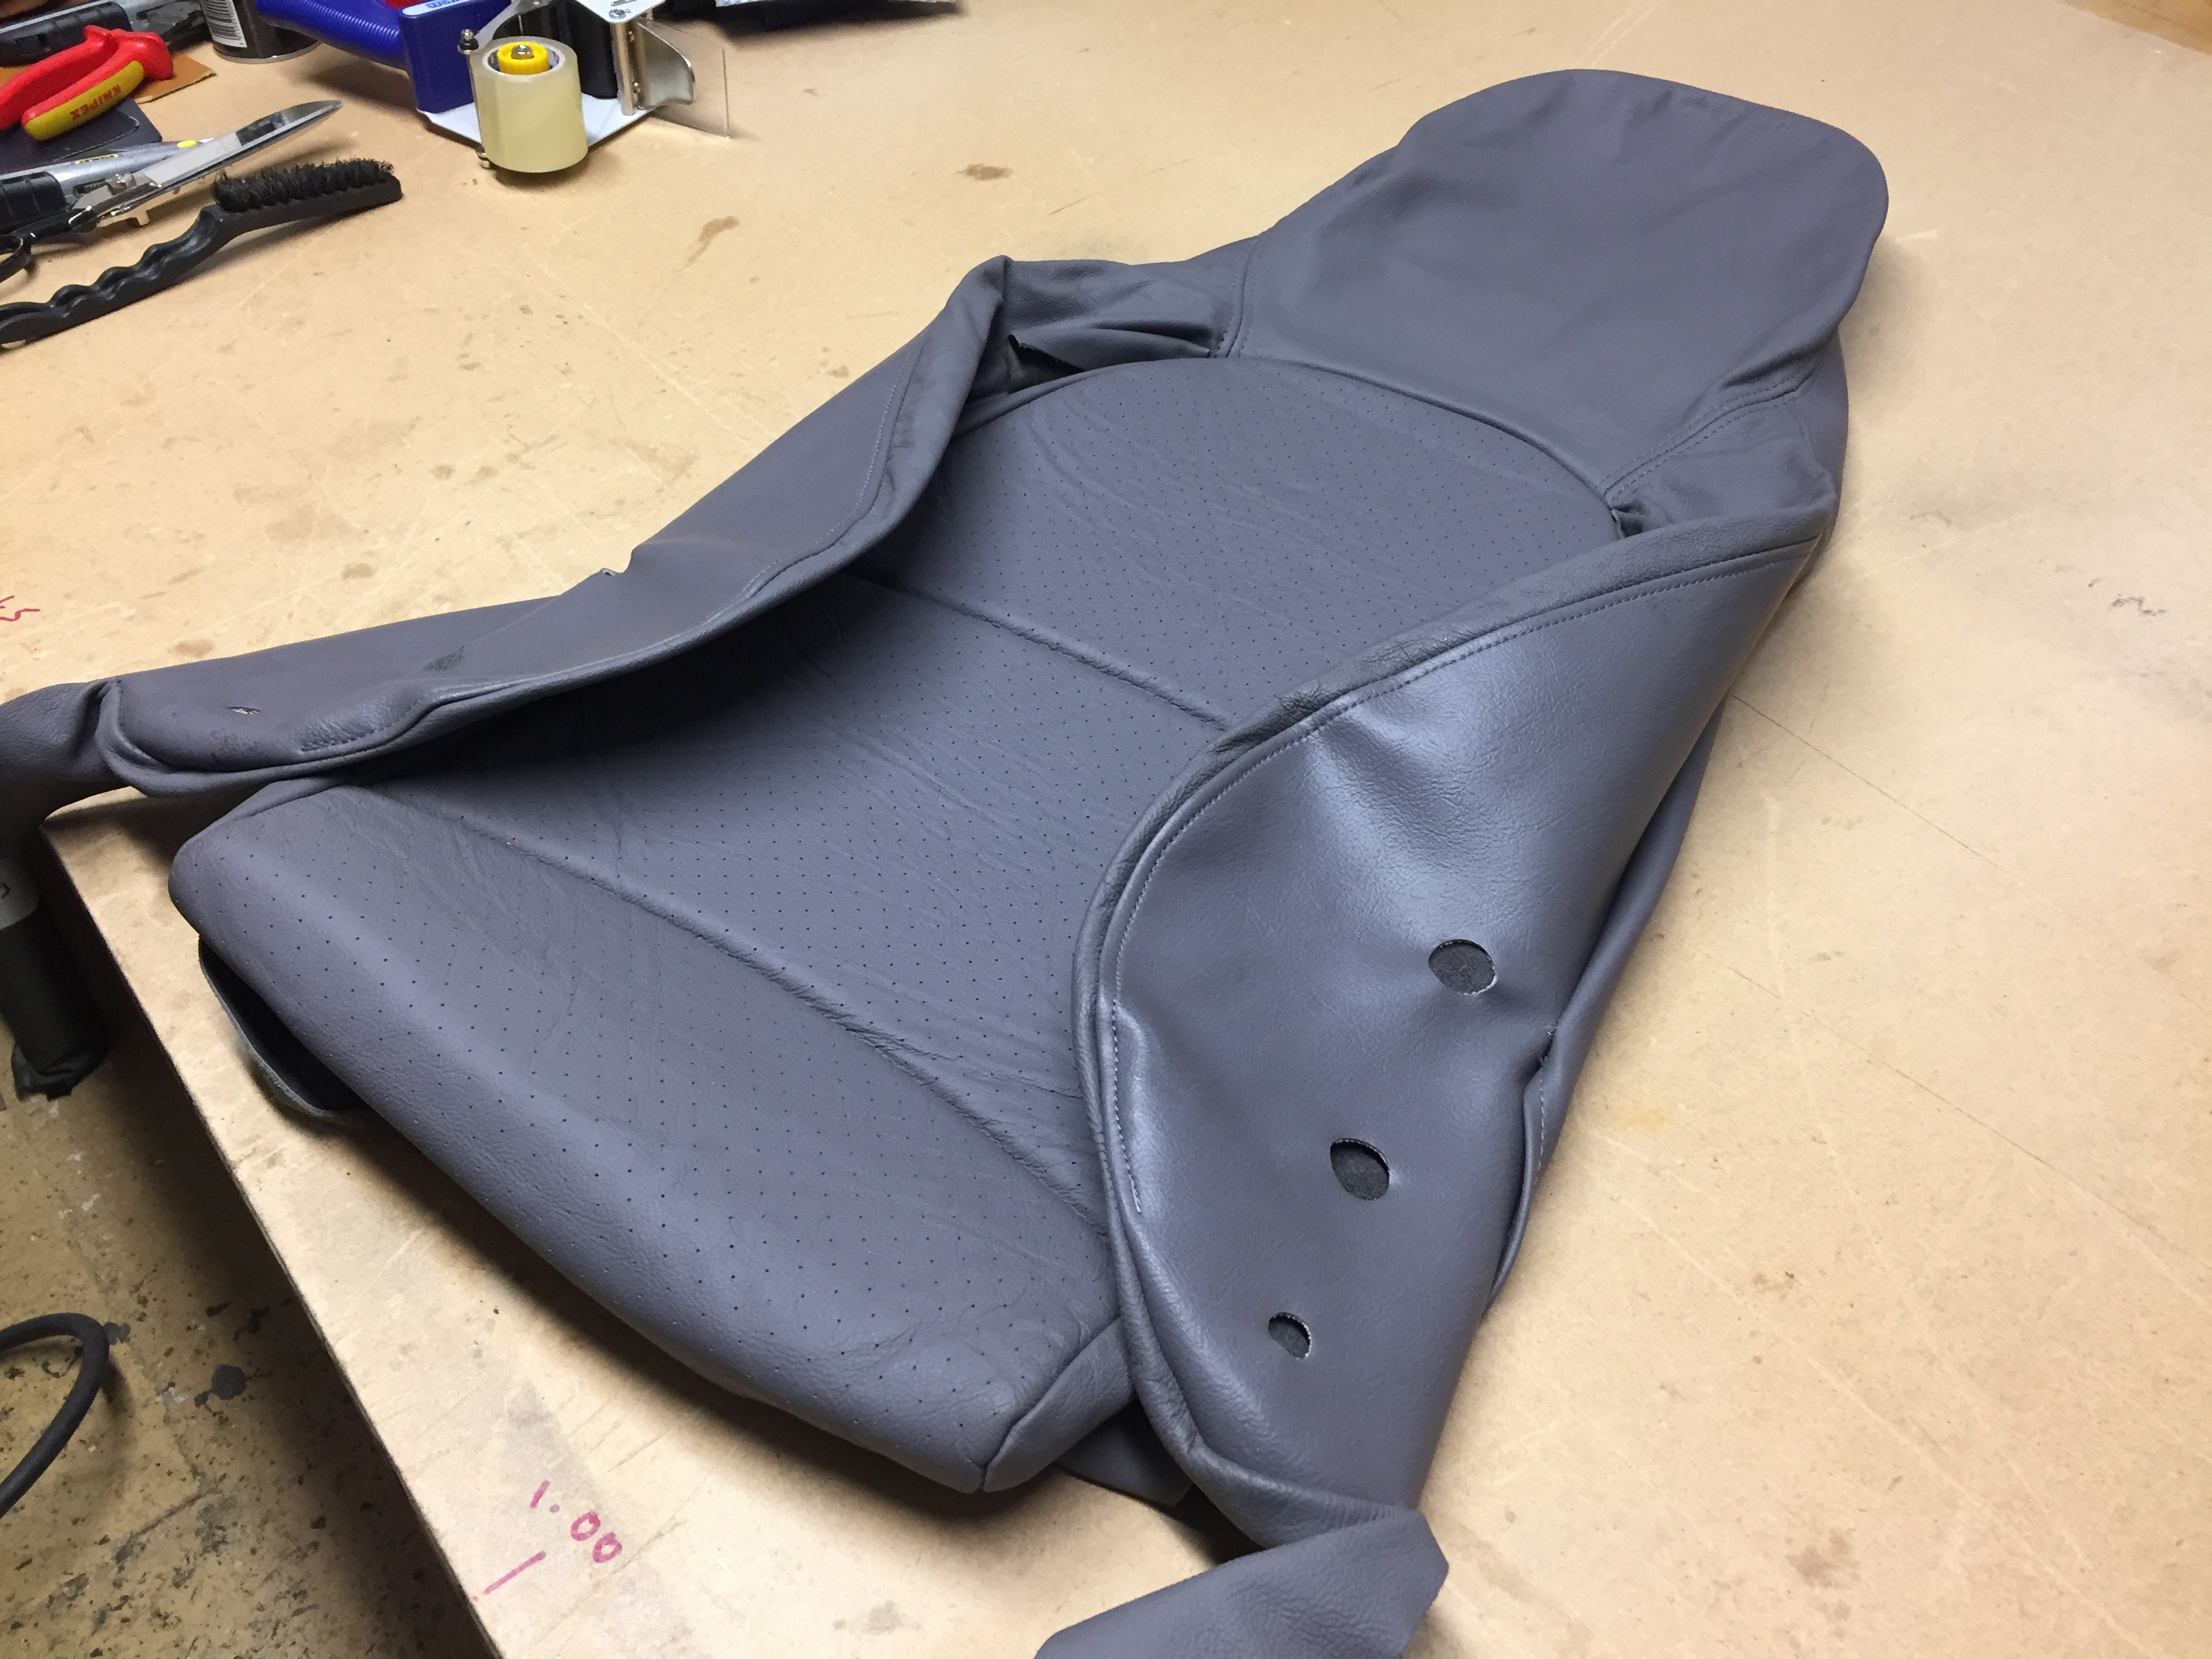 993 new OEM (993 521 123 09 APK) backrest cover  Classic grey leather / leatherette  @ £ 175.00